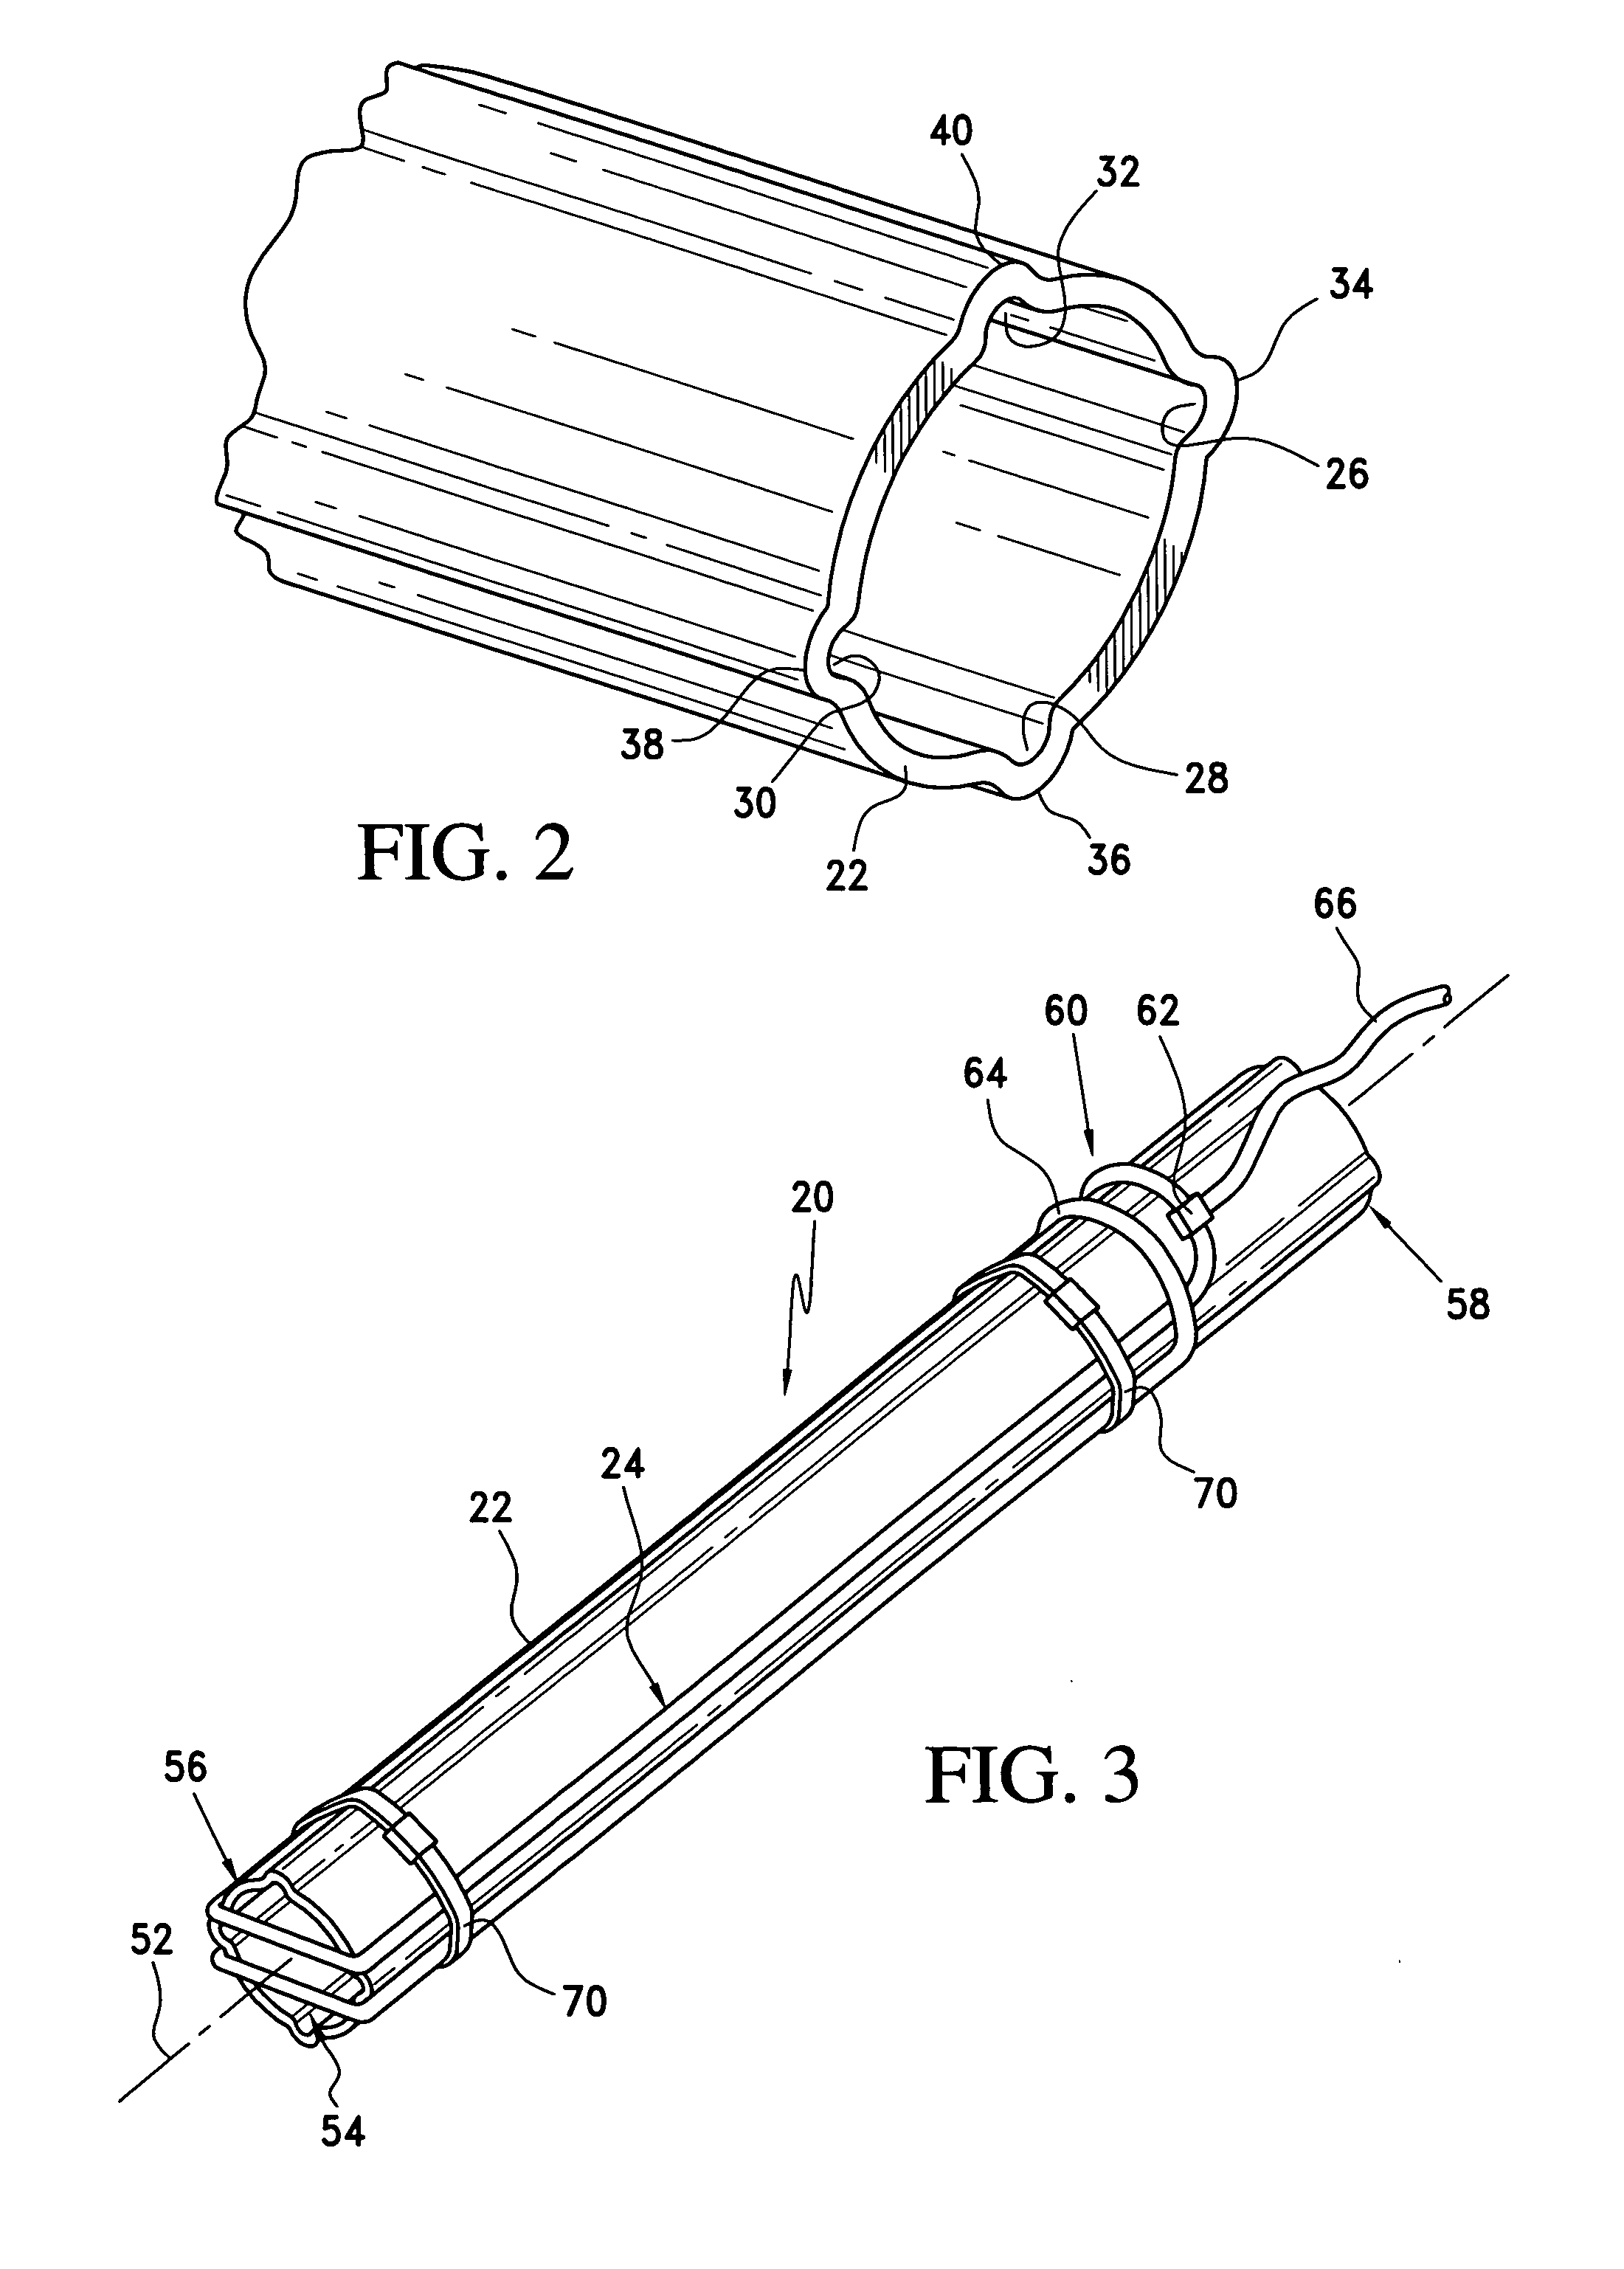 Elongated coil assembly for electromagnetic borehole surveying